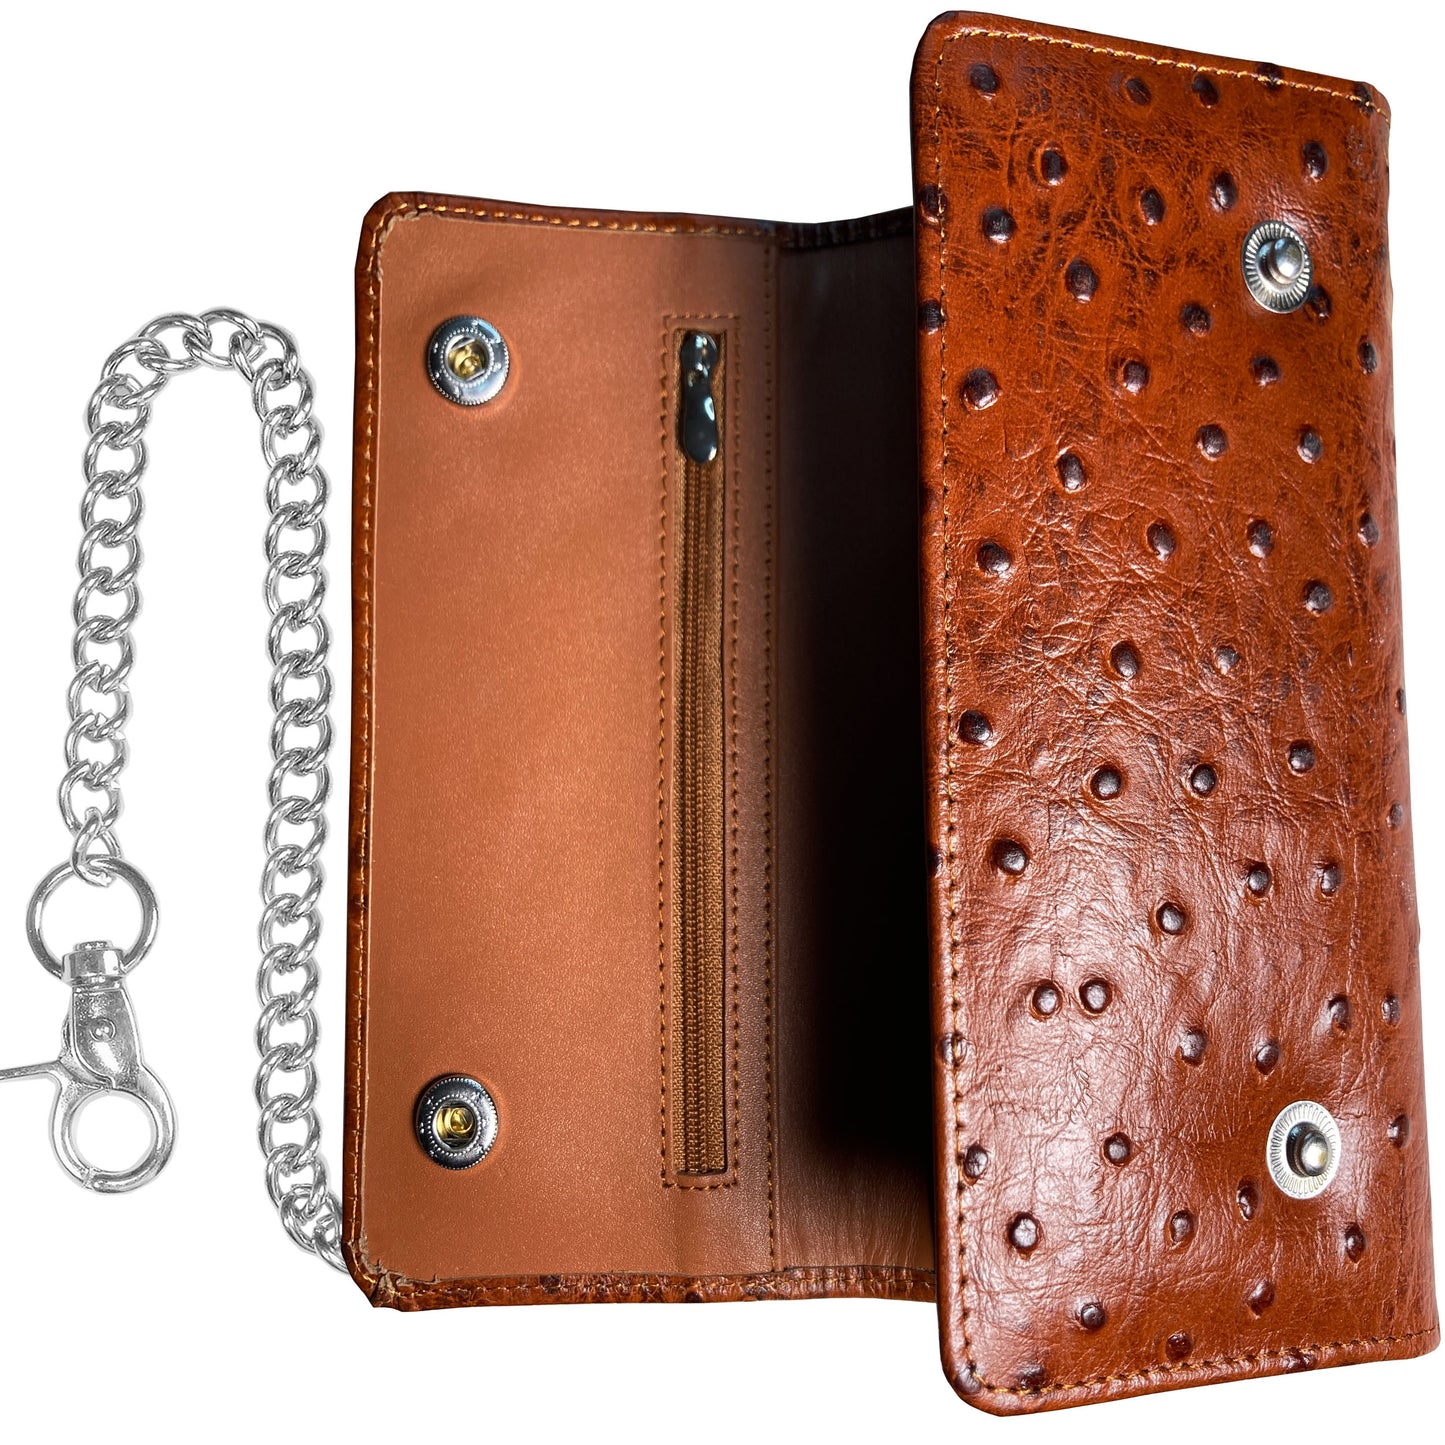 IBRO Motorcycle Chain Wallet for Men – 100% Natural Genuine Leather, Long Trifold RFID Blocking Wallet Ostrich Brown